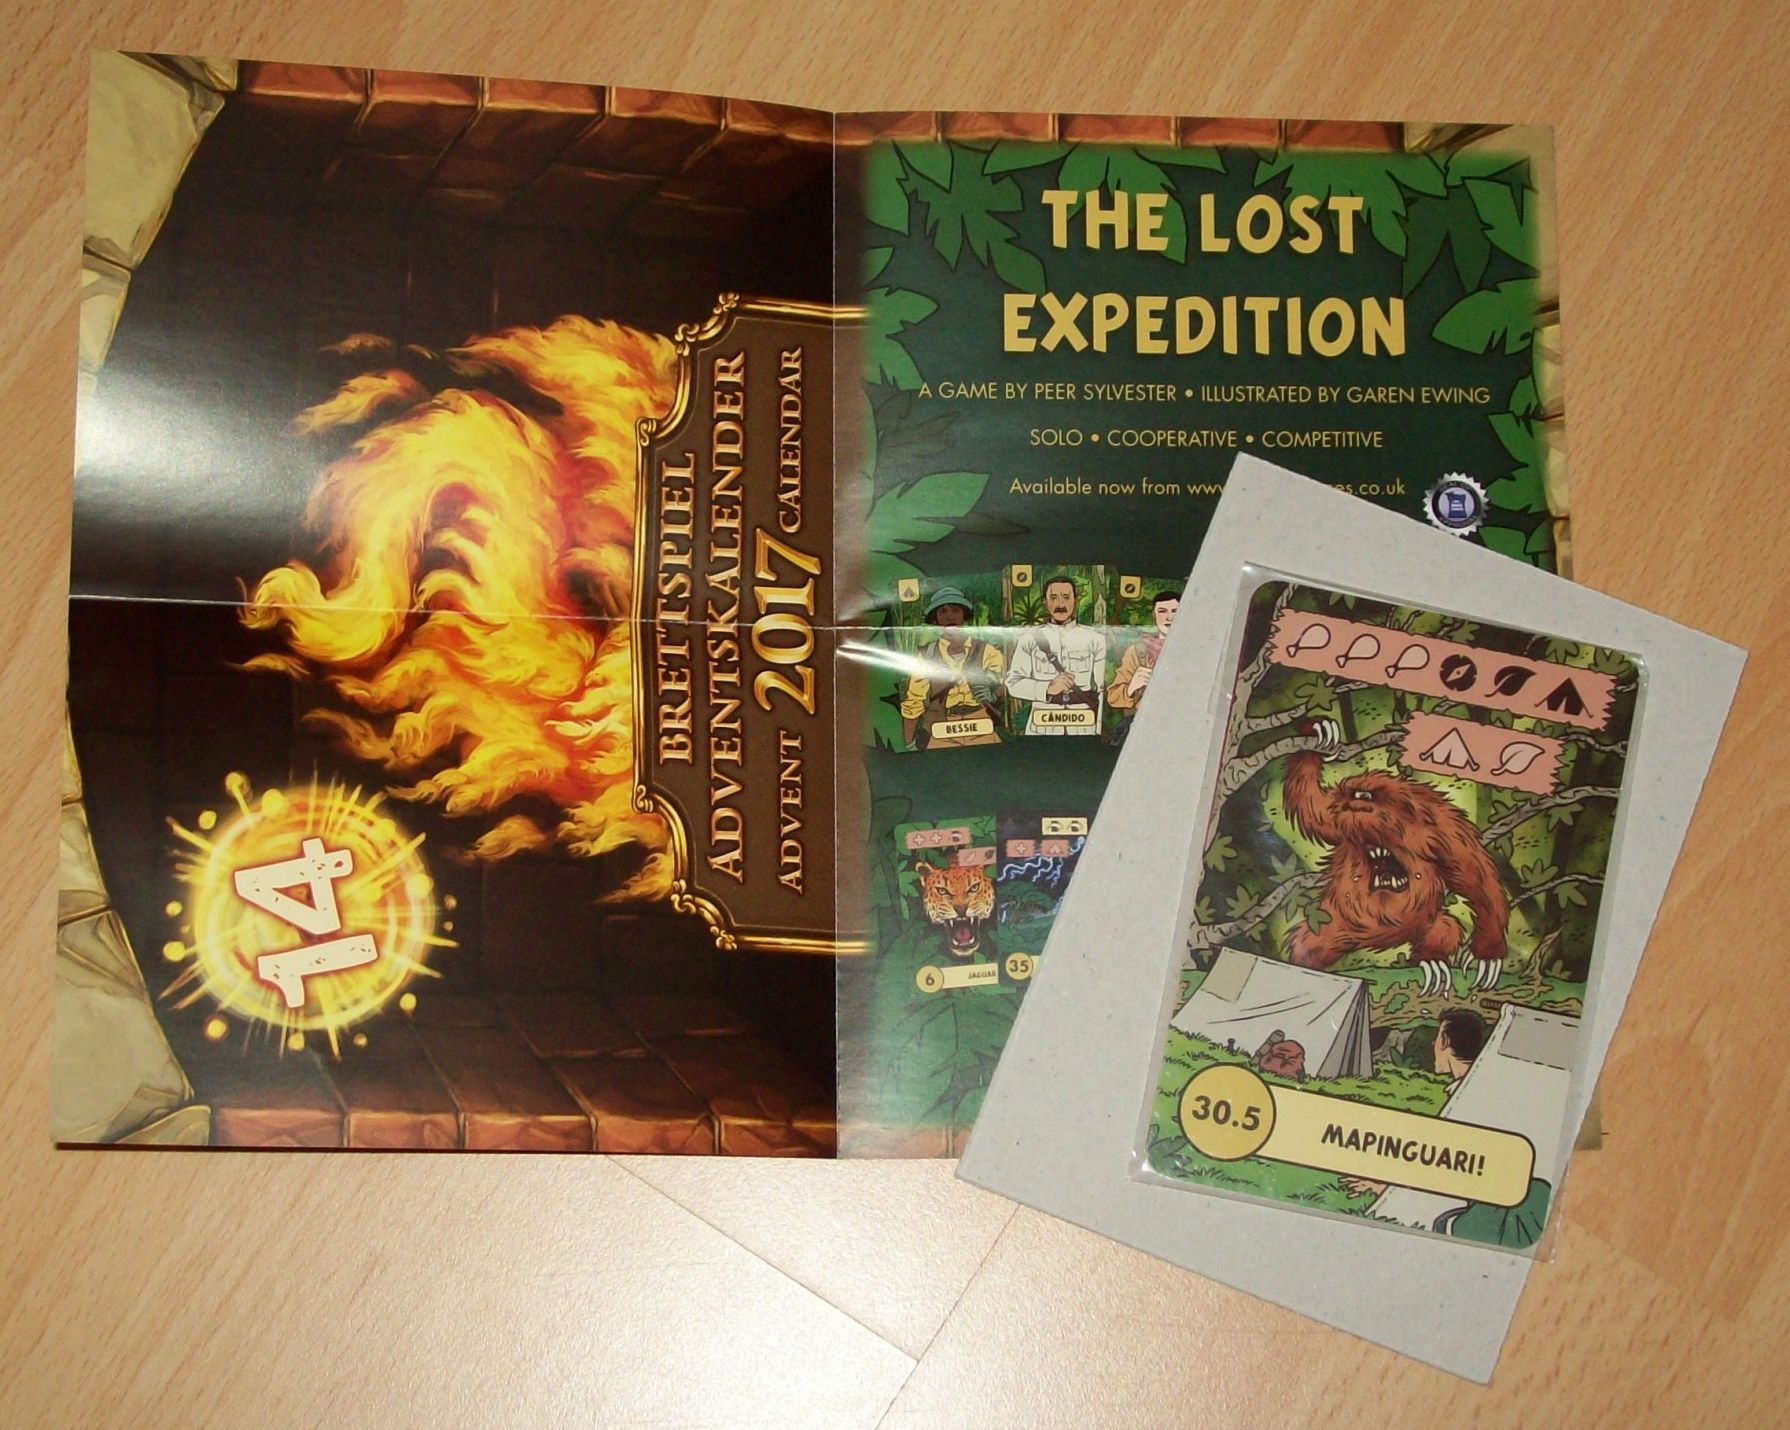 The Lost Expedition: The Creature Promo